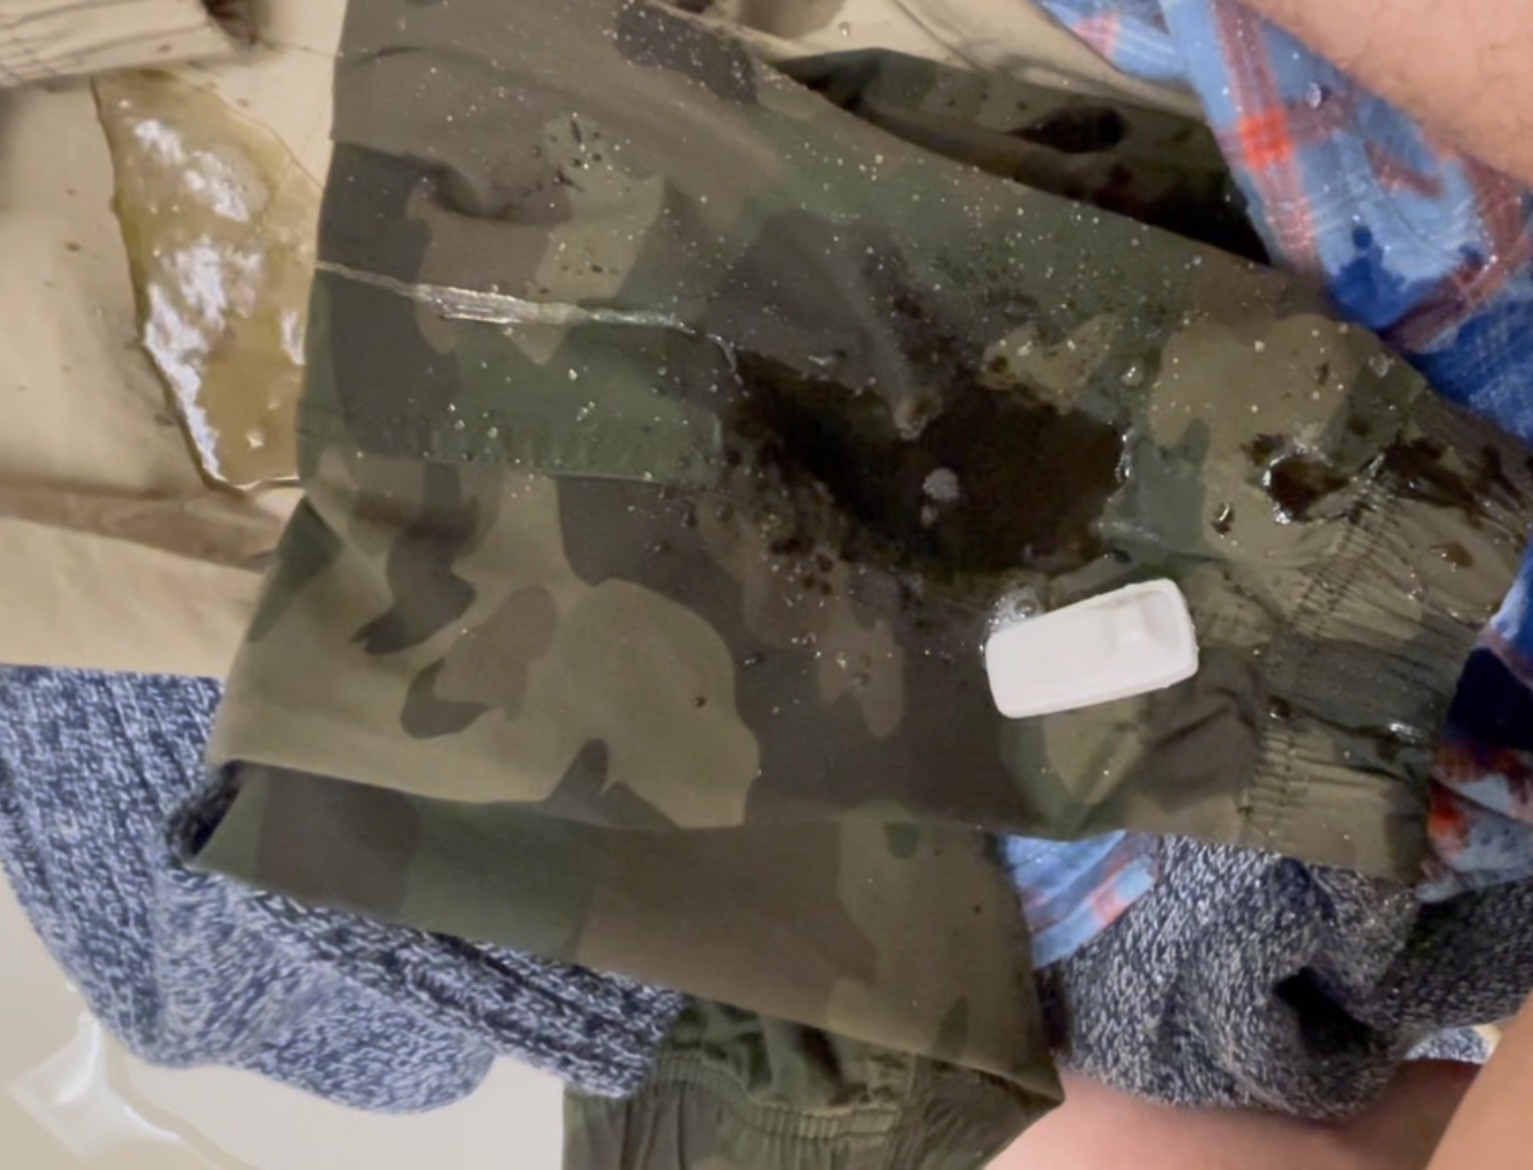 FTM soaks store clothes in piss